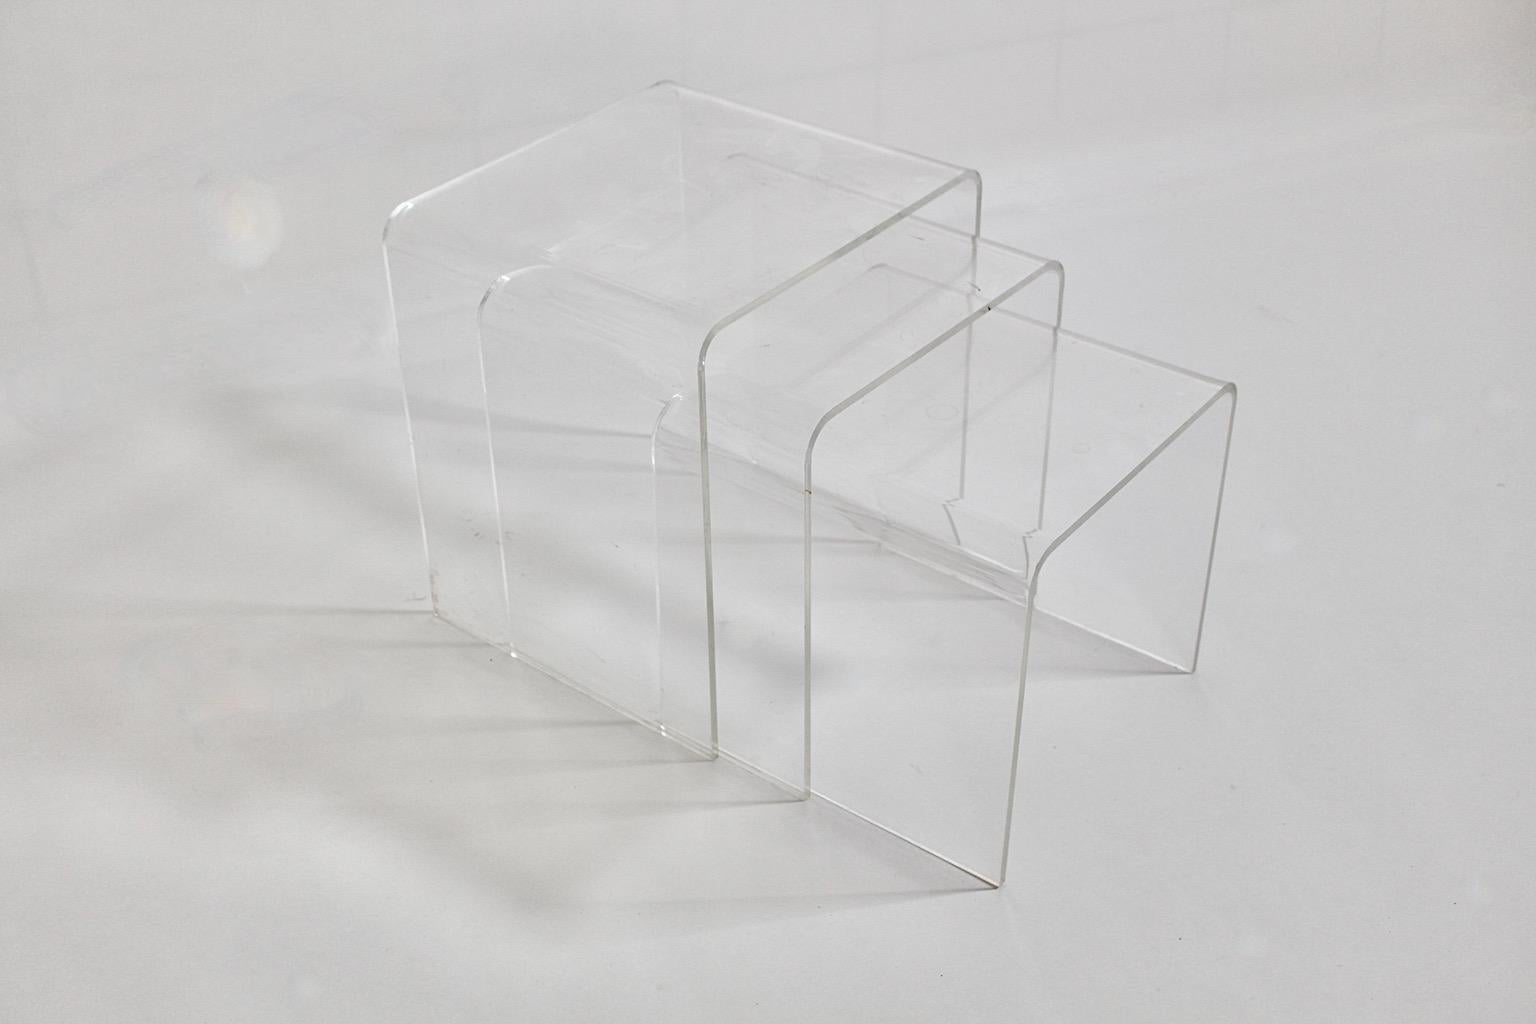 Modernist vintage nesting table from lucite in beautiful waterfall form 1970s Italy.
A wonderful set of three ( 3 ) tables in different sizes - nesting tables or stacking tables - in waterfall like shape. Perfect to work as side tables or sofa